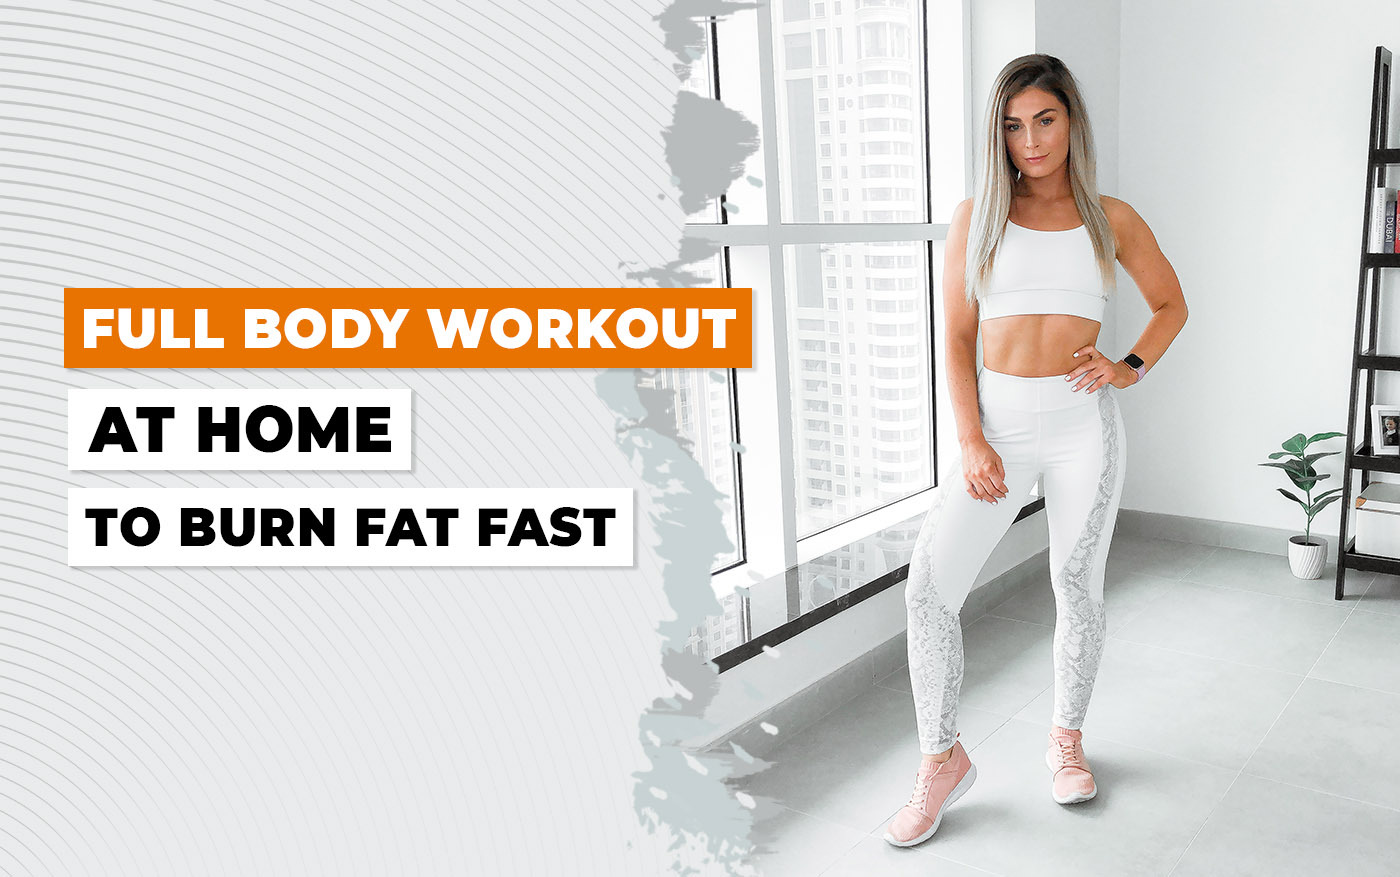 Full body Workout At Home To Burn Fat Fast